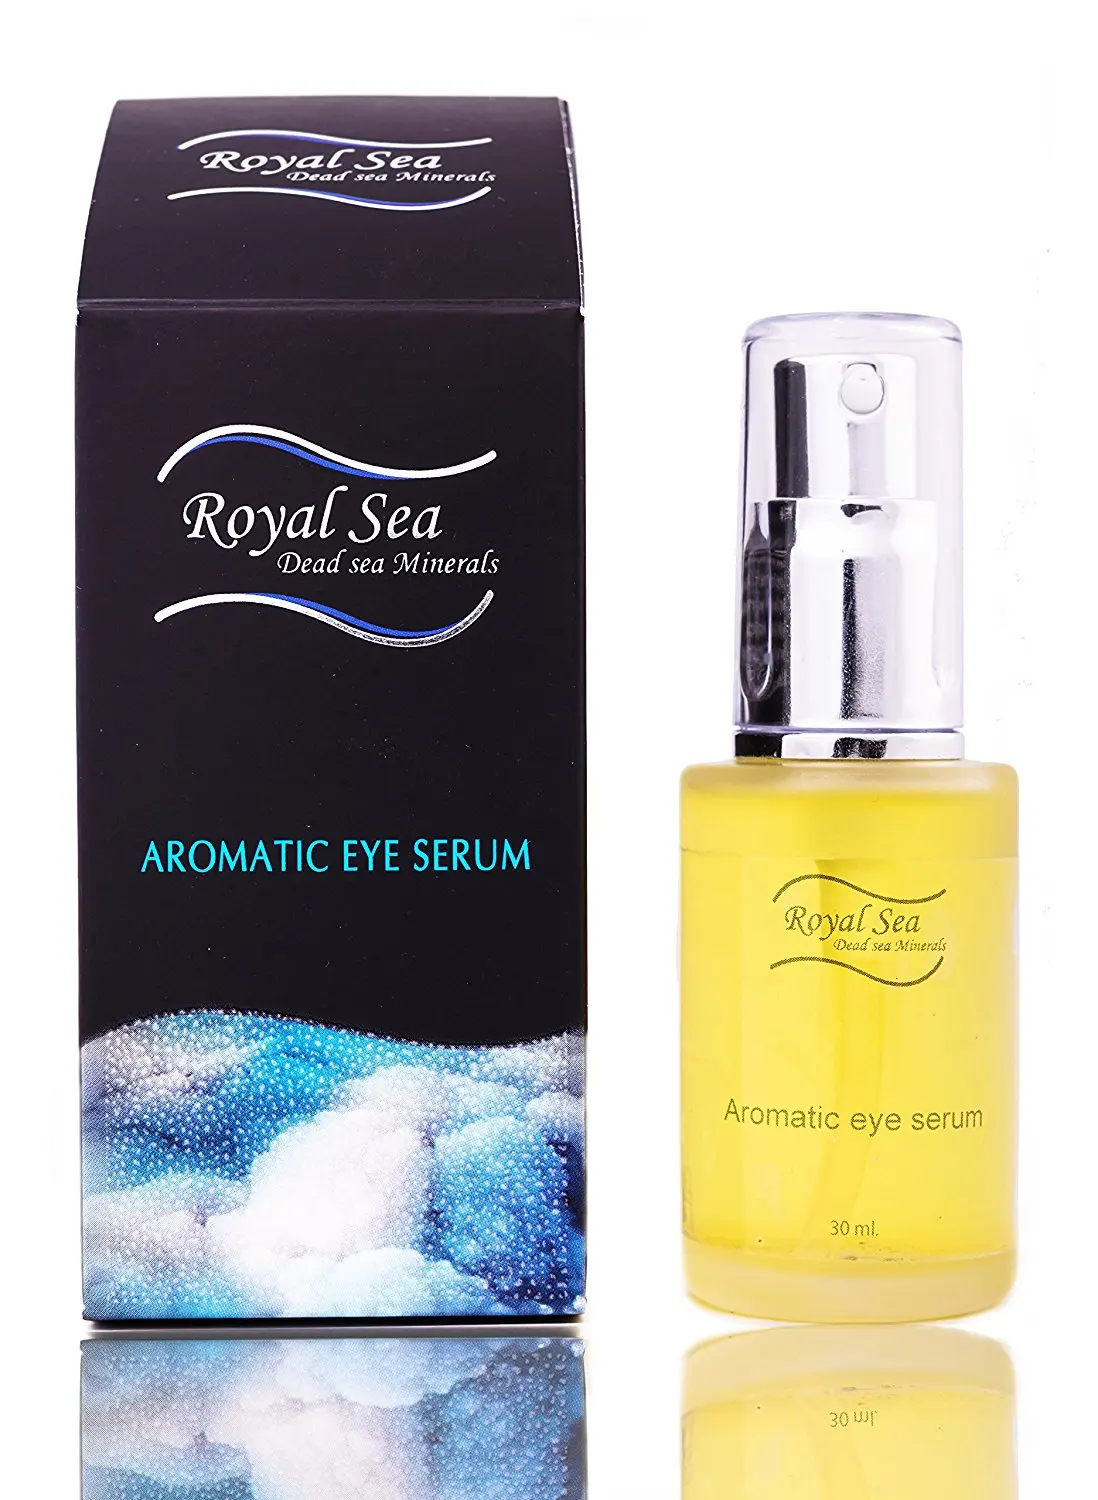 Royal Sea Dead Sea Minerals EYE Serum Vitamins, Plant Extracts, Active Oi.....